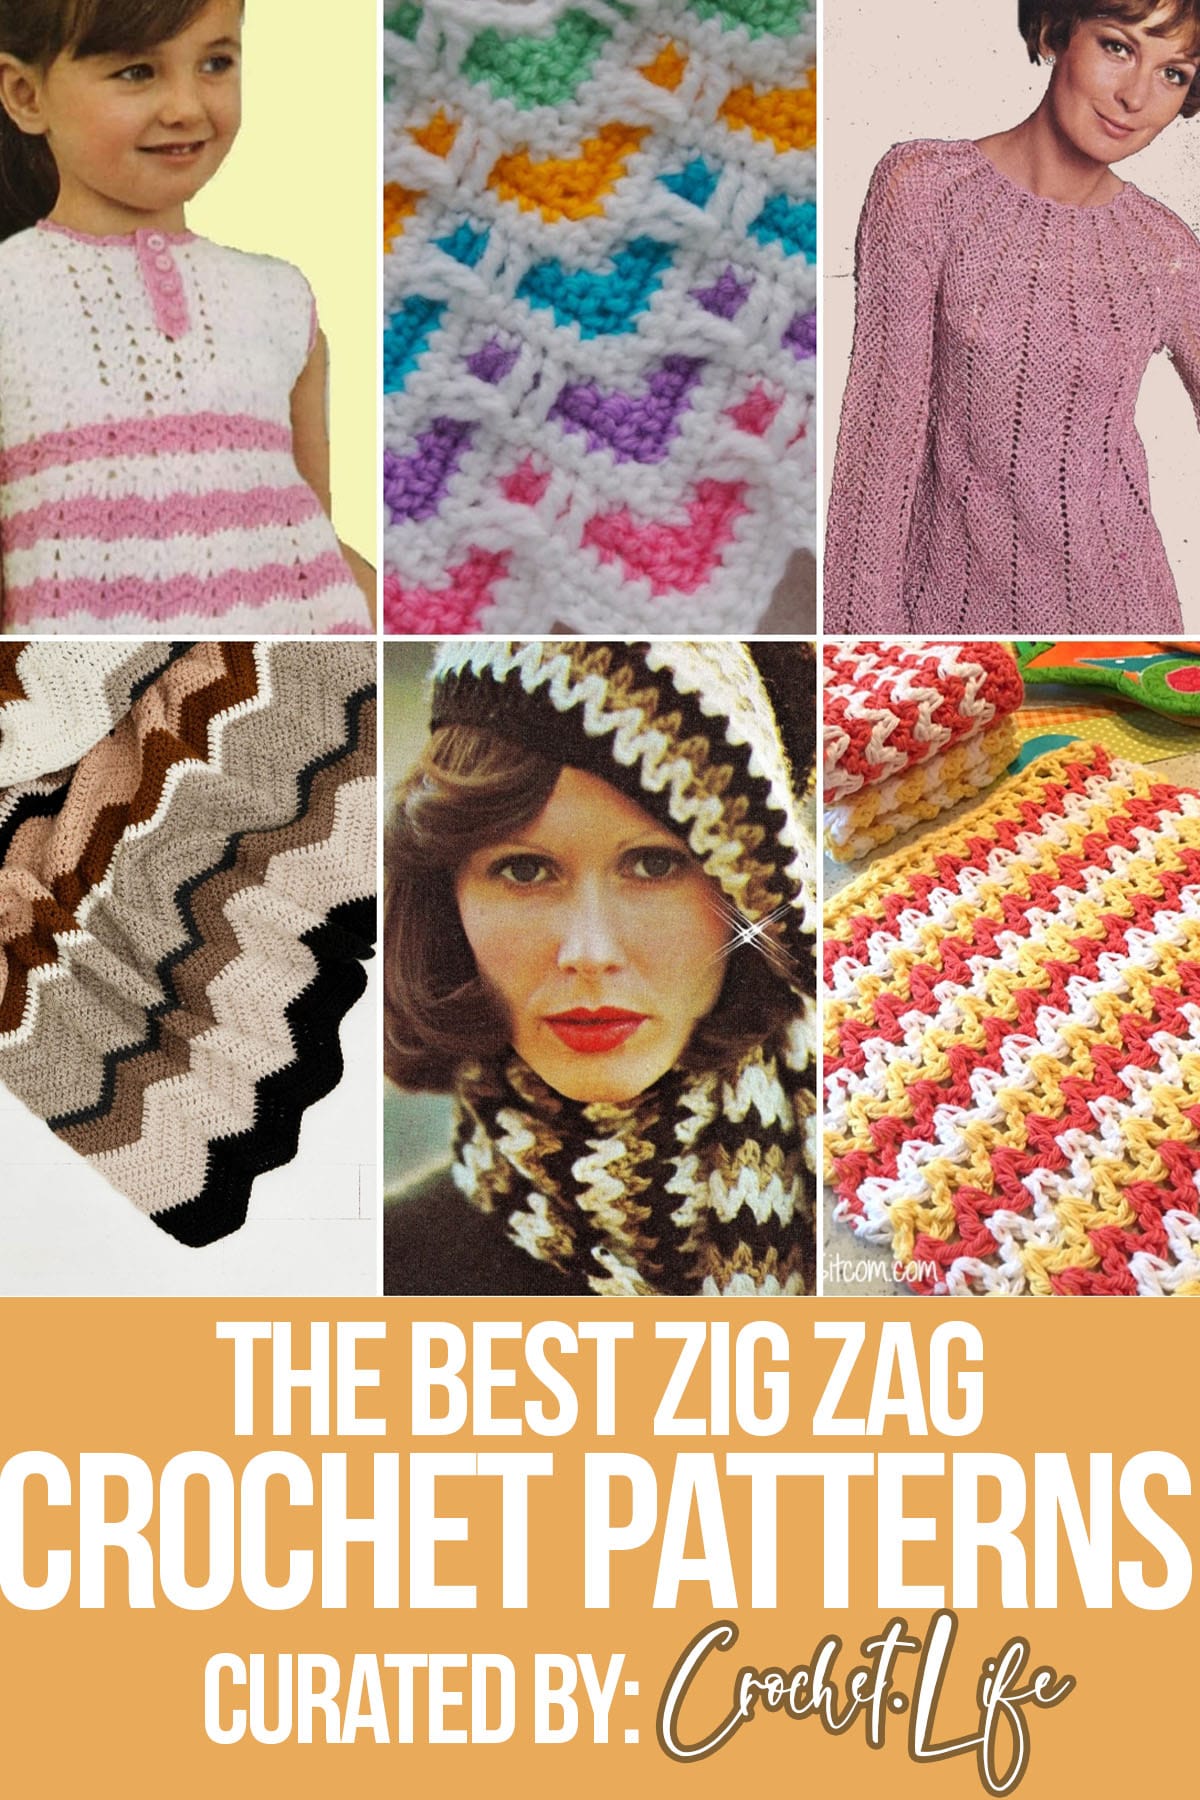 photo collage of crochet patterns for zig zag design with text which reads the best zig zag crochet patterns curated by crochet.life